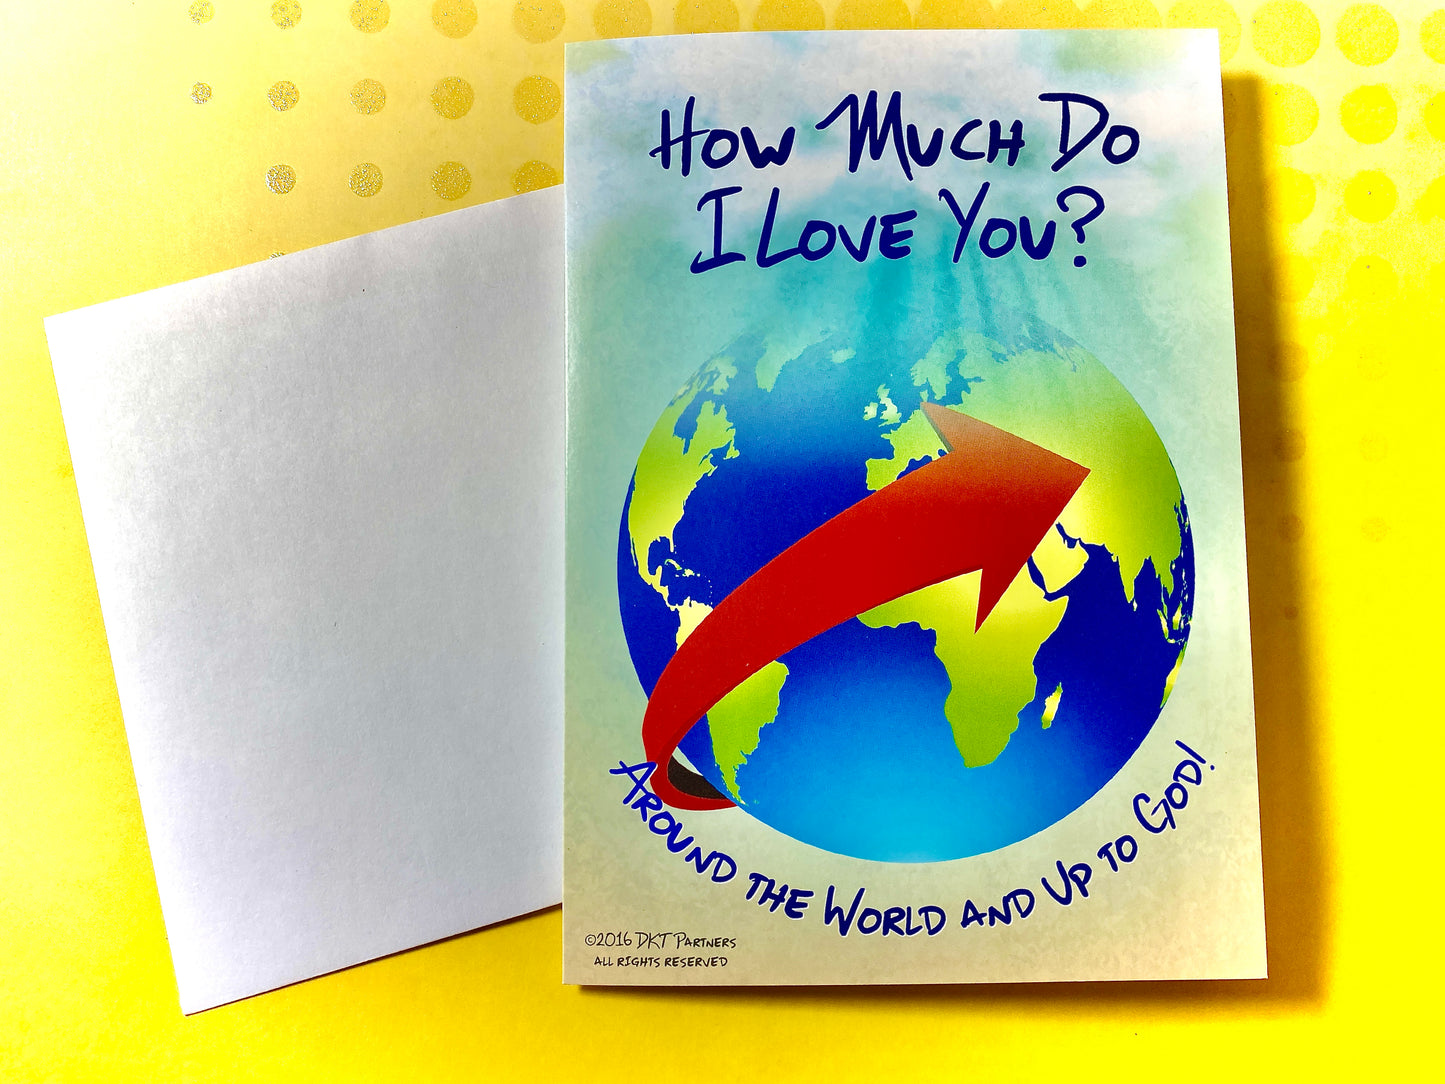 Full front of the "How Much Do I Love You?" greeting card.